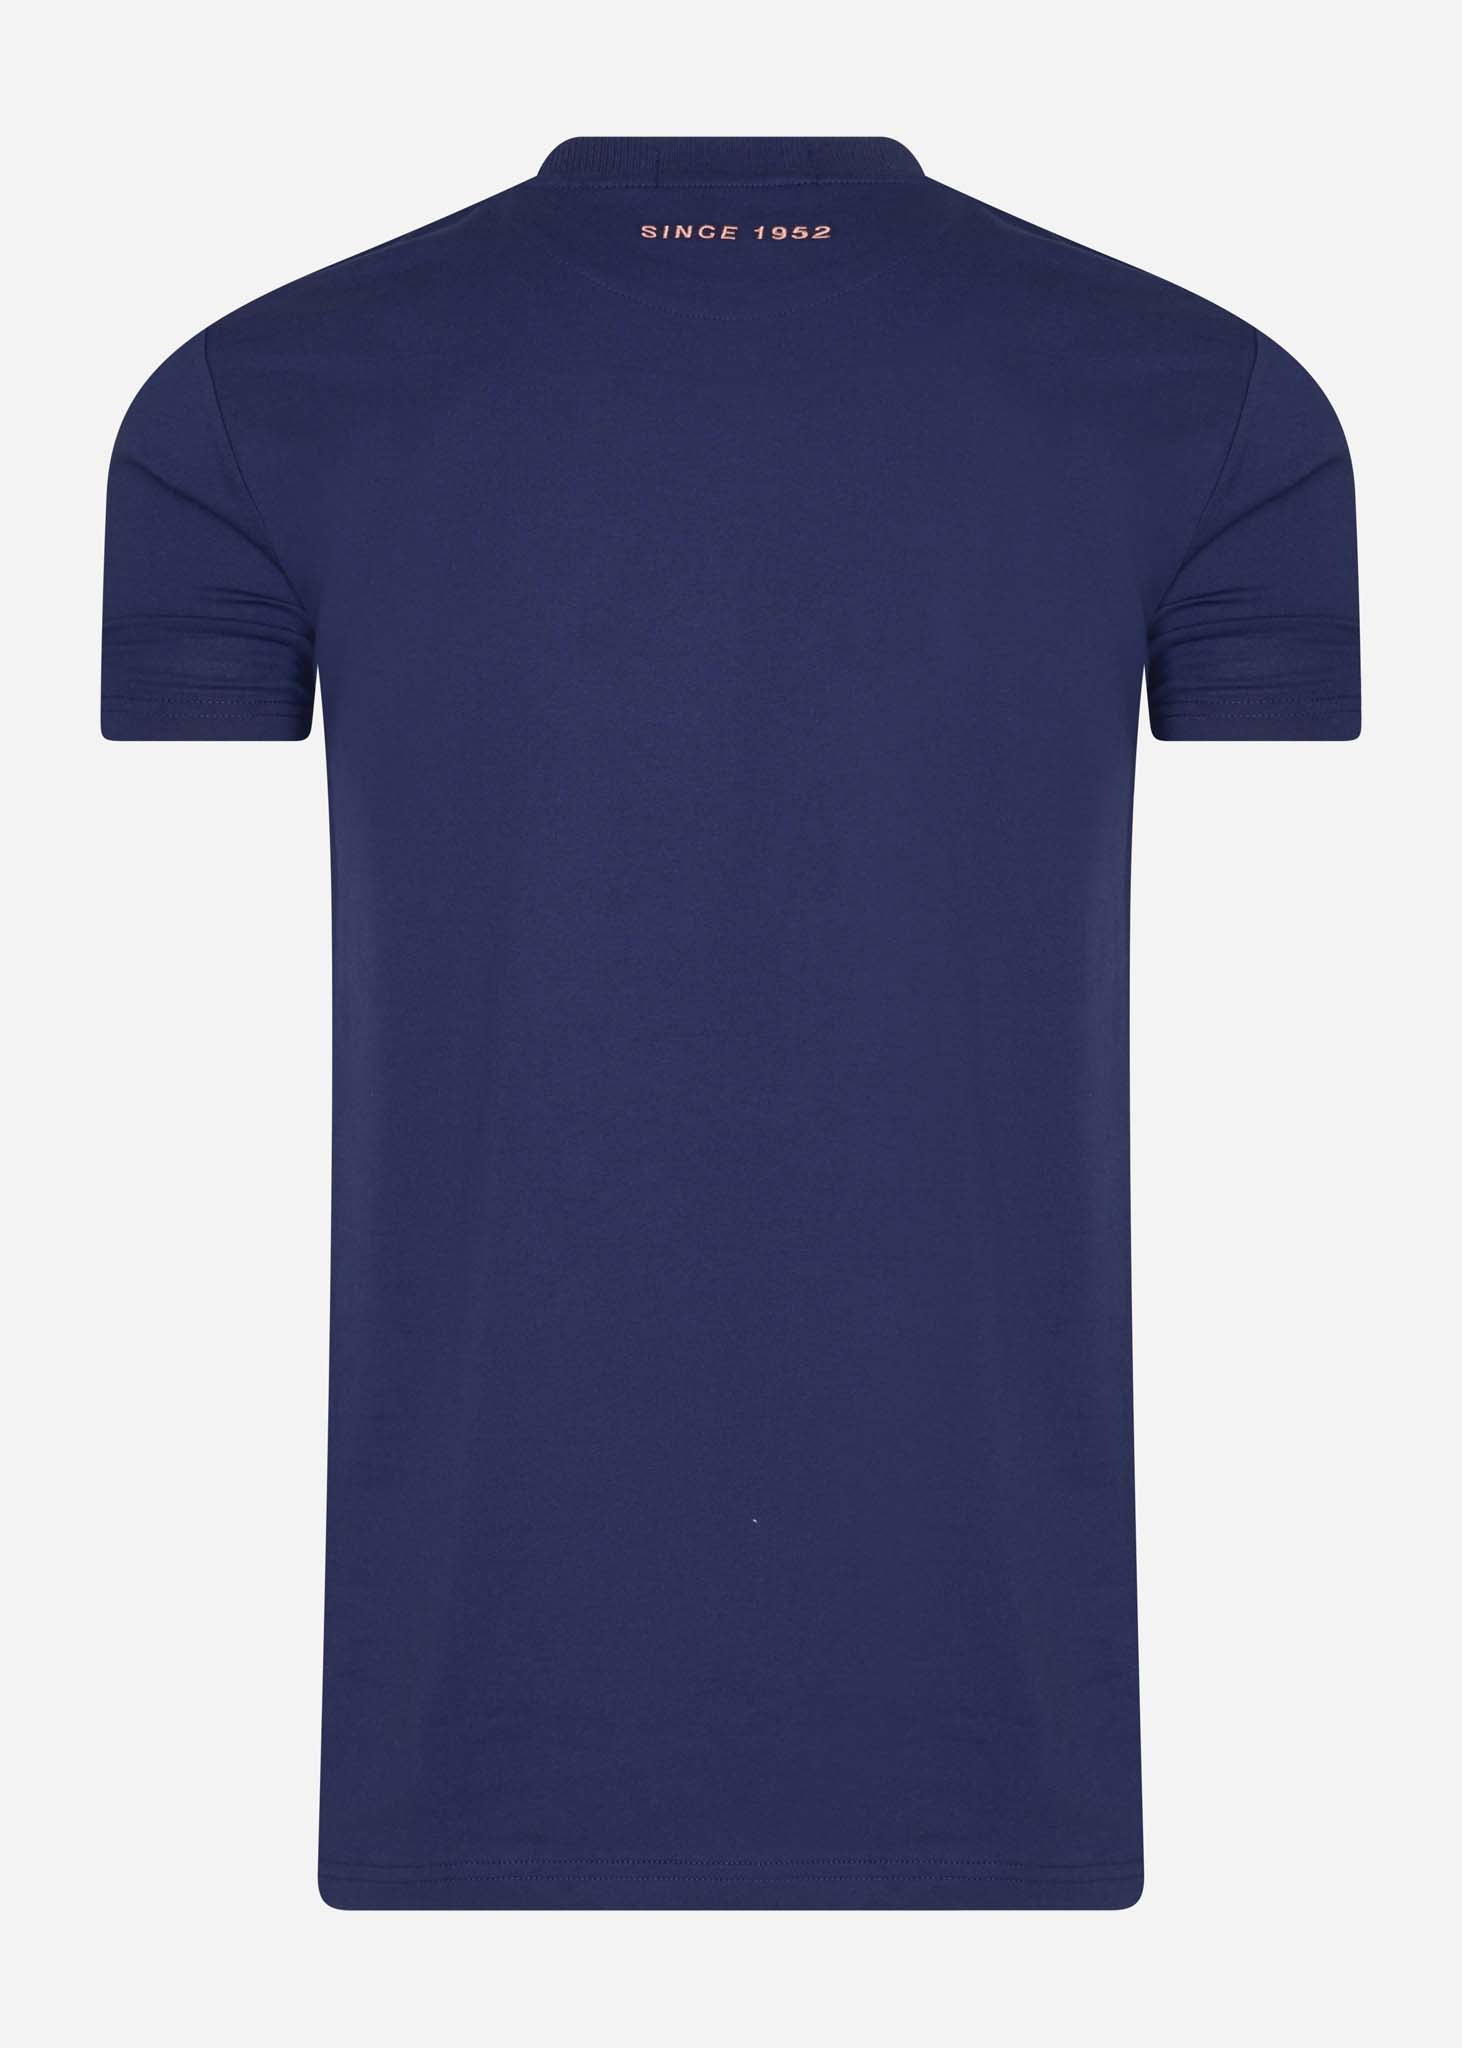 Fred Perry T-shirts  Laurel wreath graphic t-shirt - french navy 